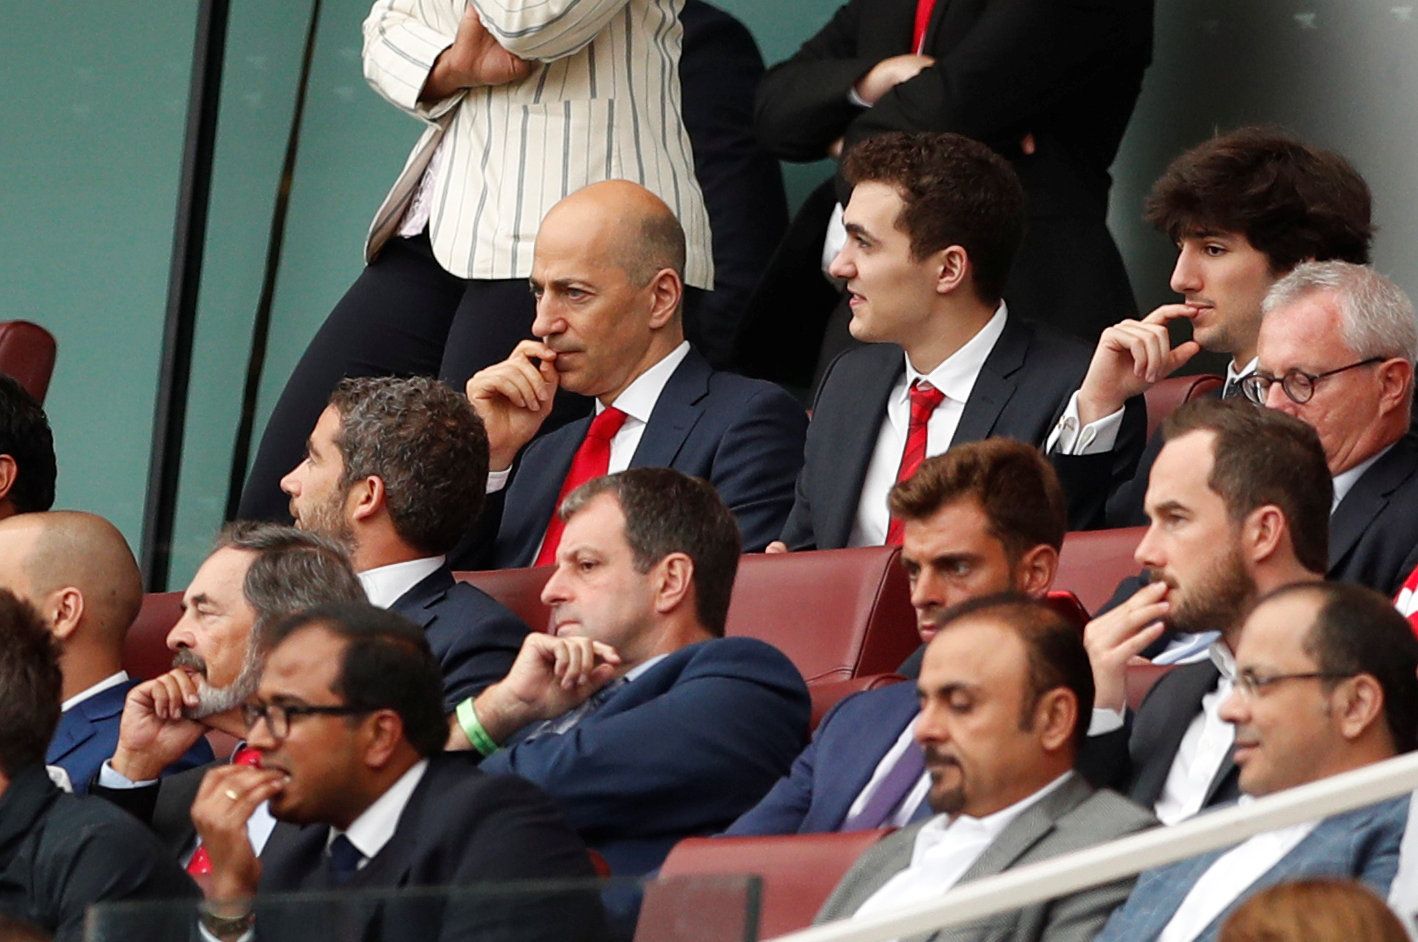 Soccer Football - Premier League - Arsenal v Manchester City - Emirates Stadium, London, Britain - August 12, 2018   Arsenal Chief Executive Ivan Gazidis in the stands   Action Images via Reuters/John Sibley    EDITORIAL USE ONLY. No use with unauthorized audio, video, data, fixture lists, club/league logos or 